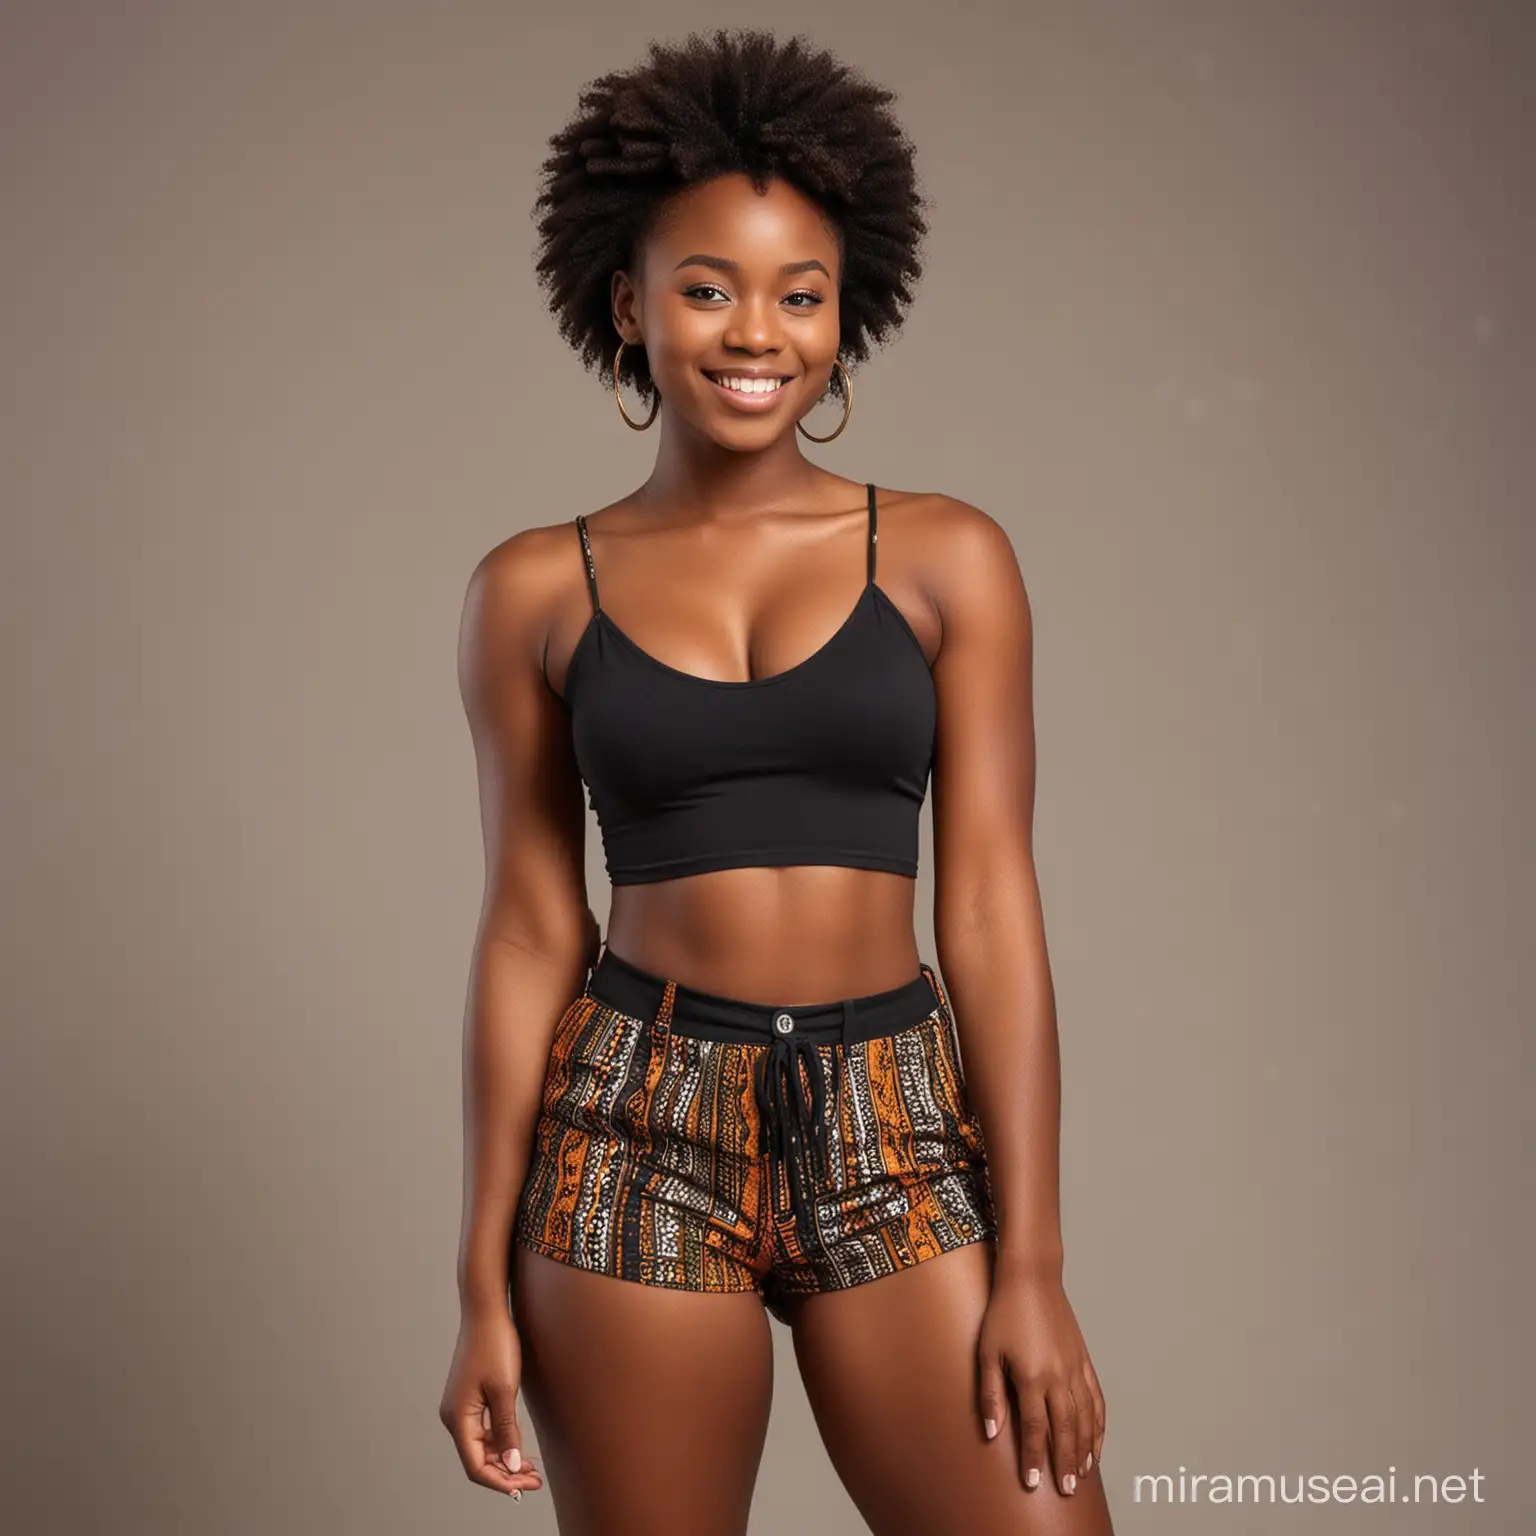 Youthful African Dancer in Traditional Bomshort with Playful Expression